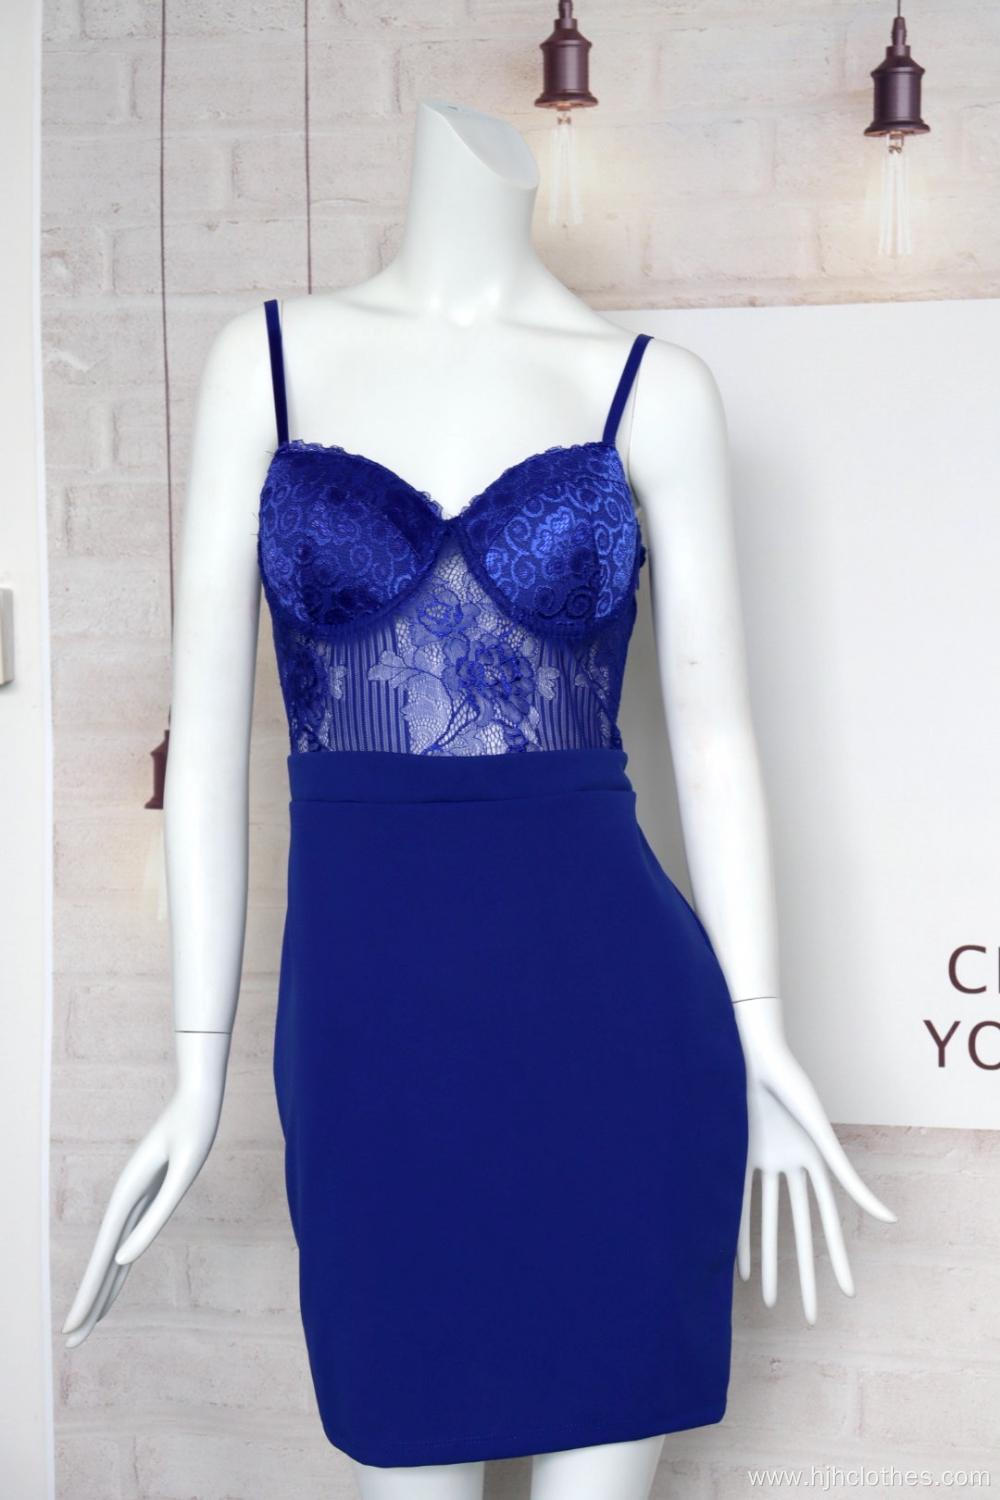 Ladies Blue Lace Strapless Dress With Breast Padded